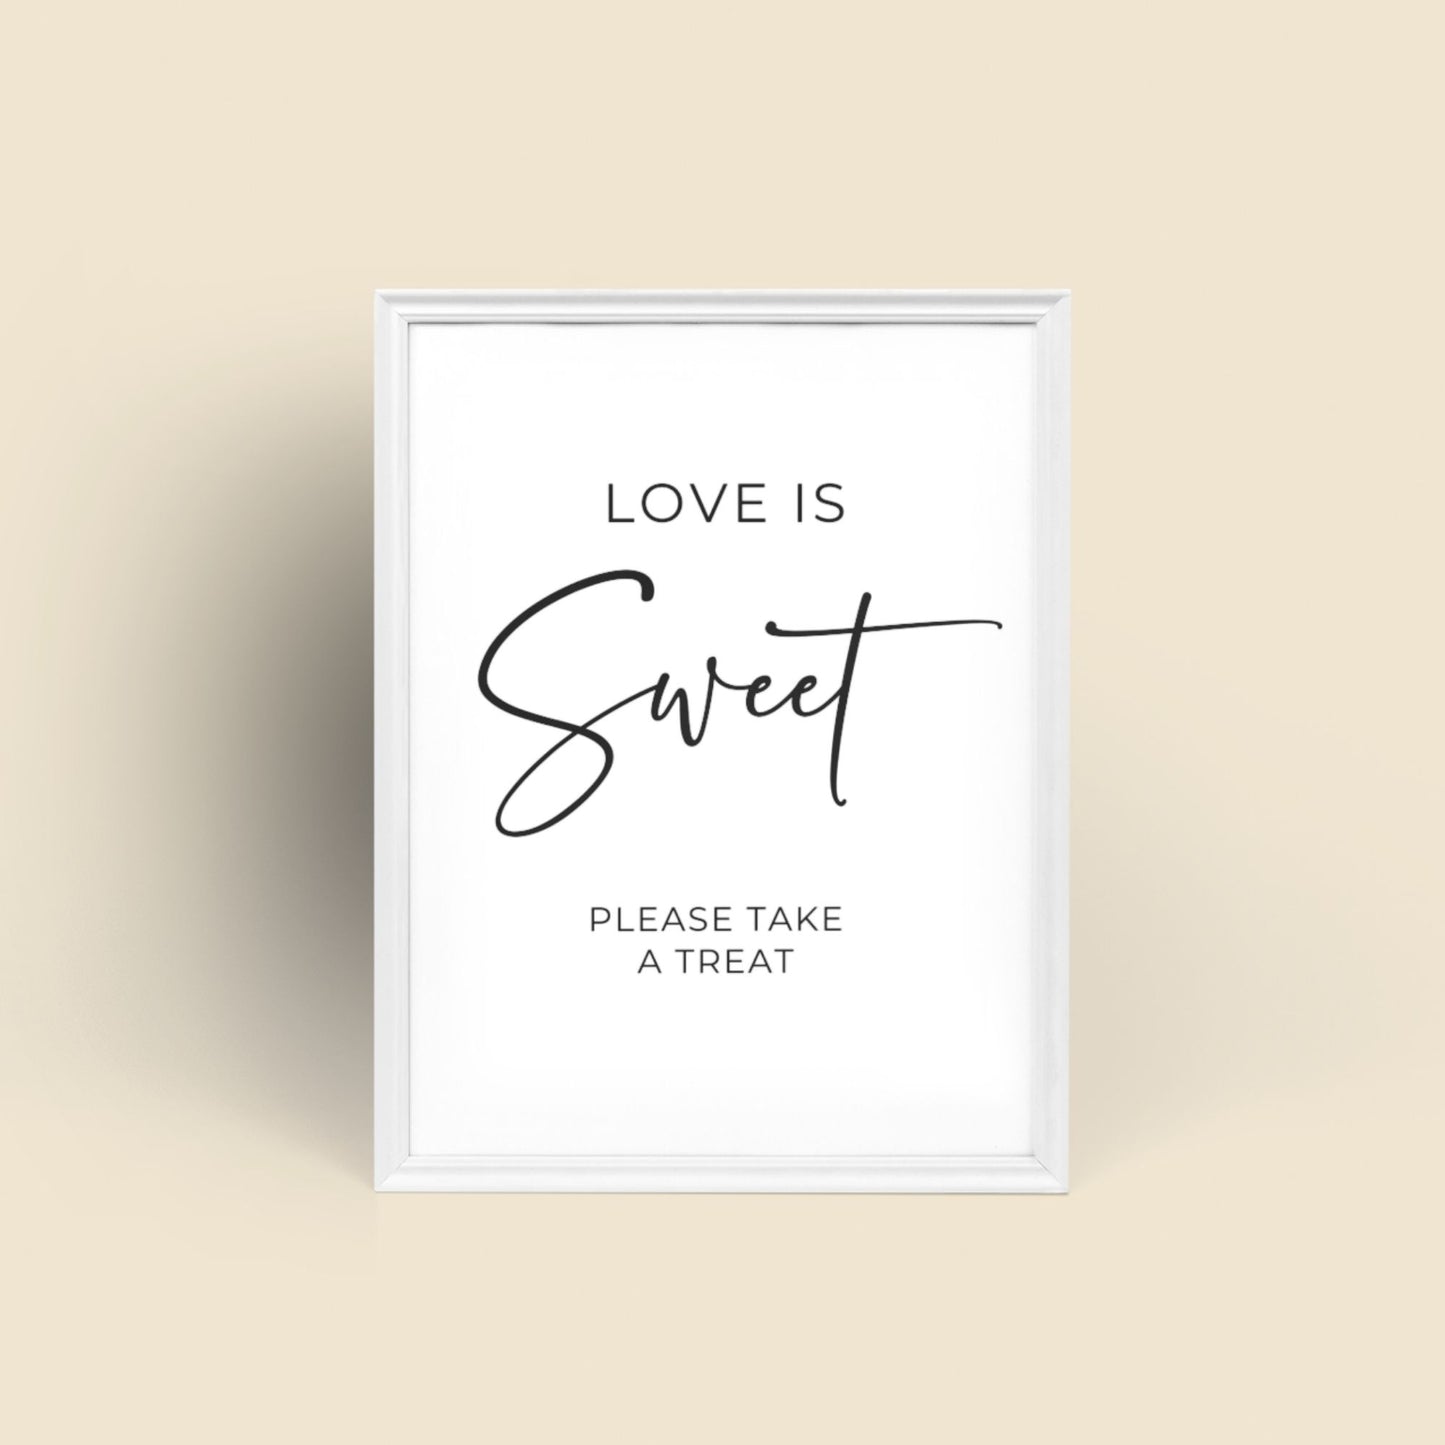 Love is Sweet Please Take a Treat Printable Sign